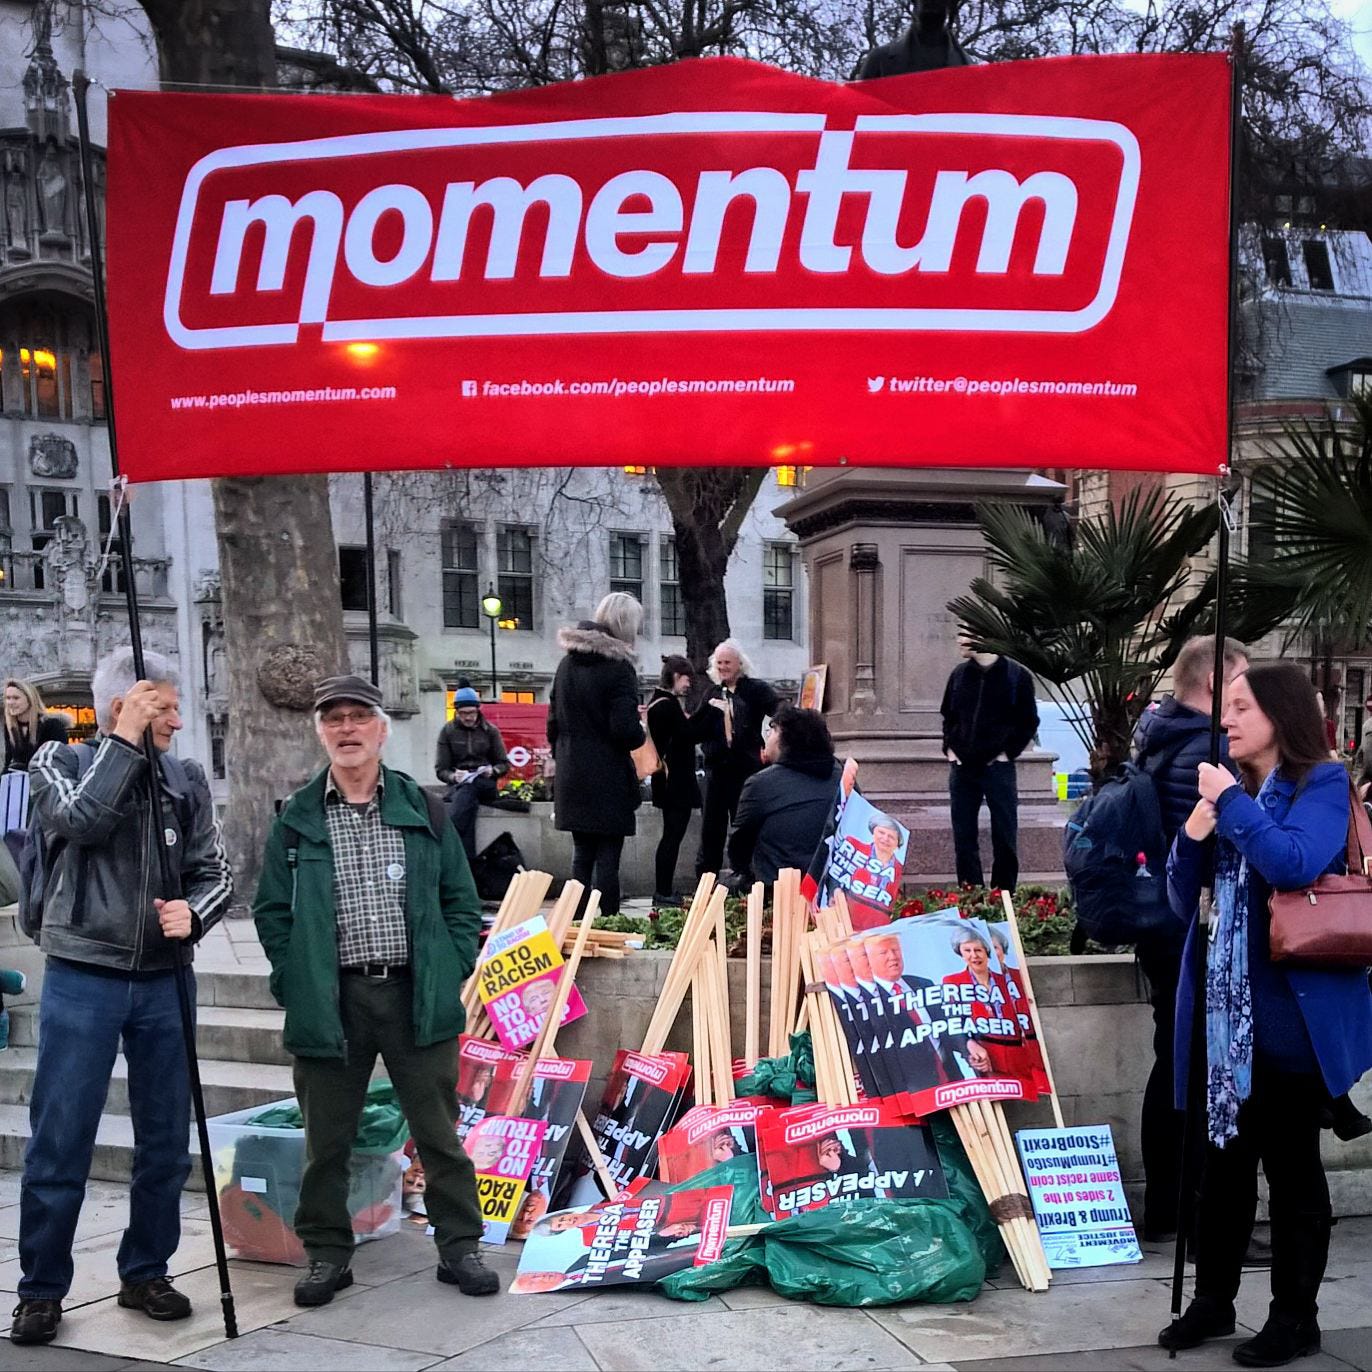 File:Momentum at the Stop Trump Rally (32638700770).jpg - Wikimedia Commons